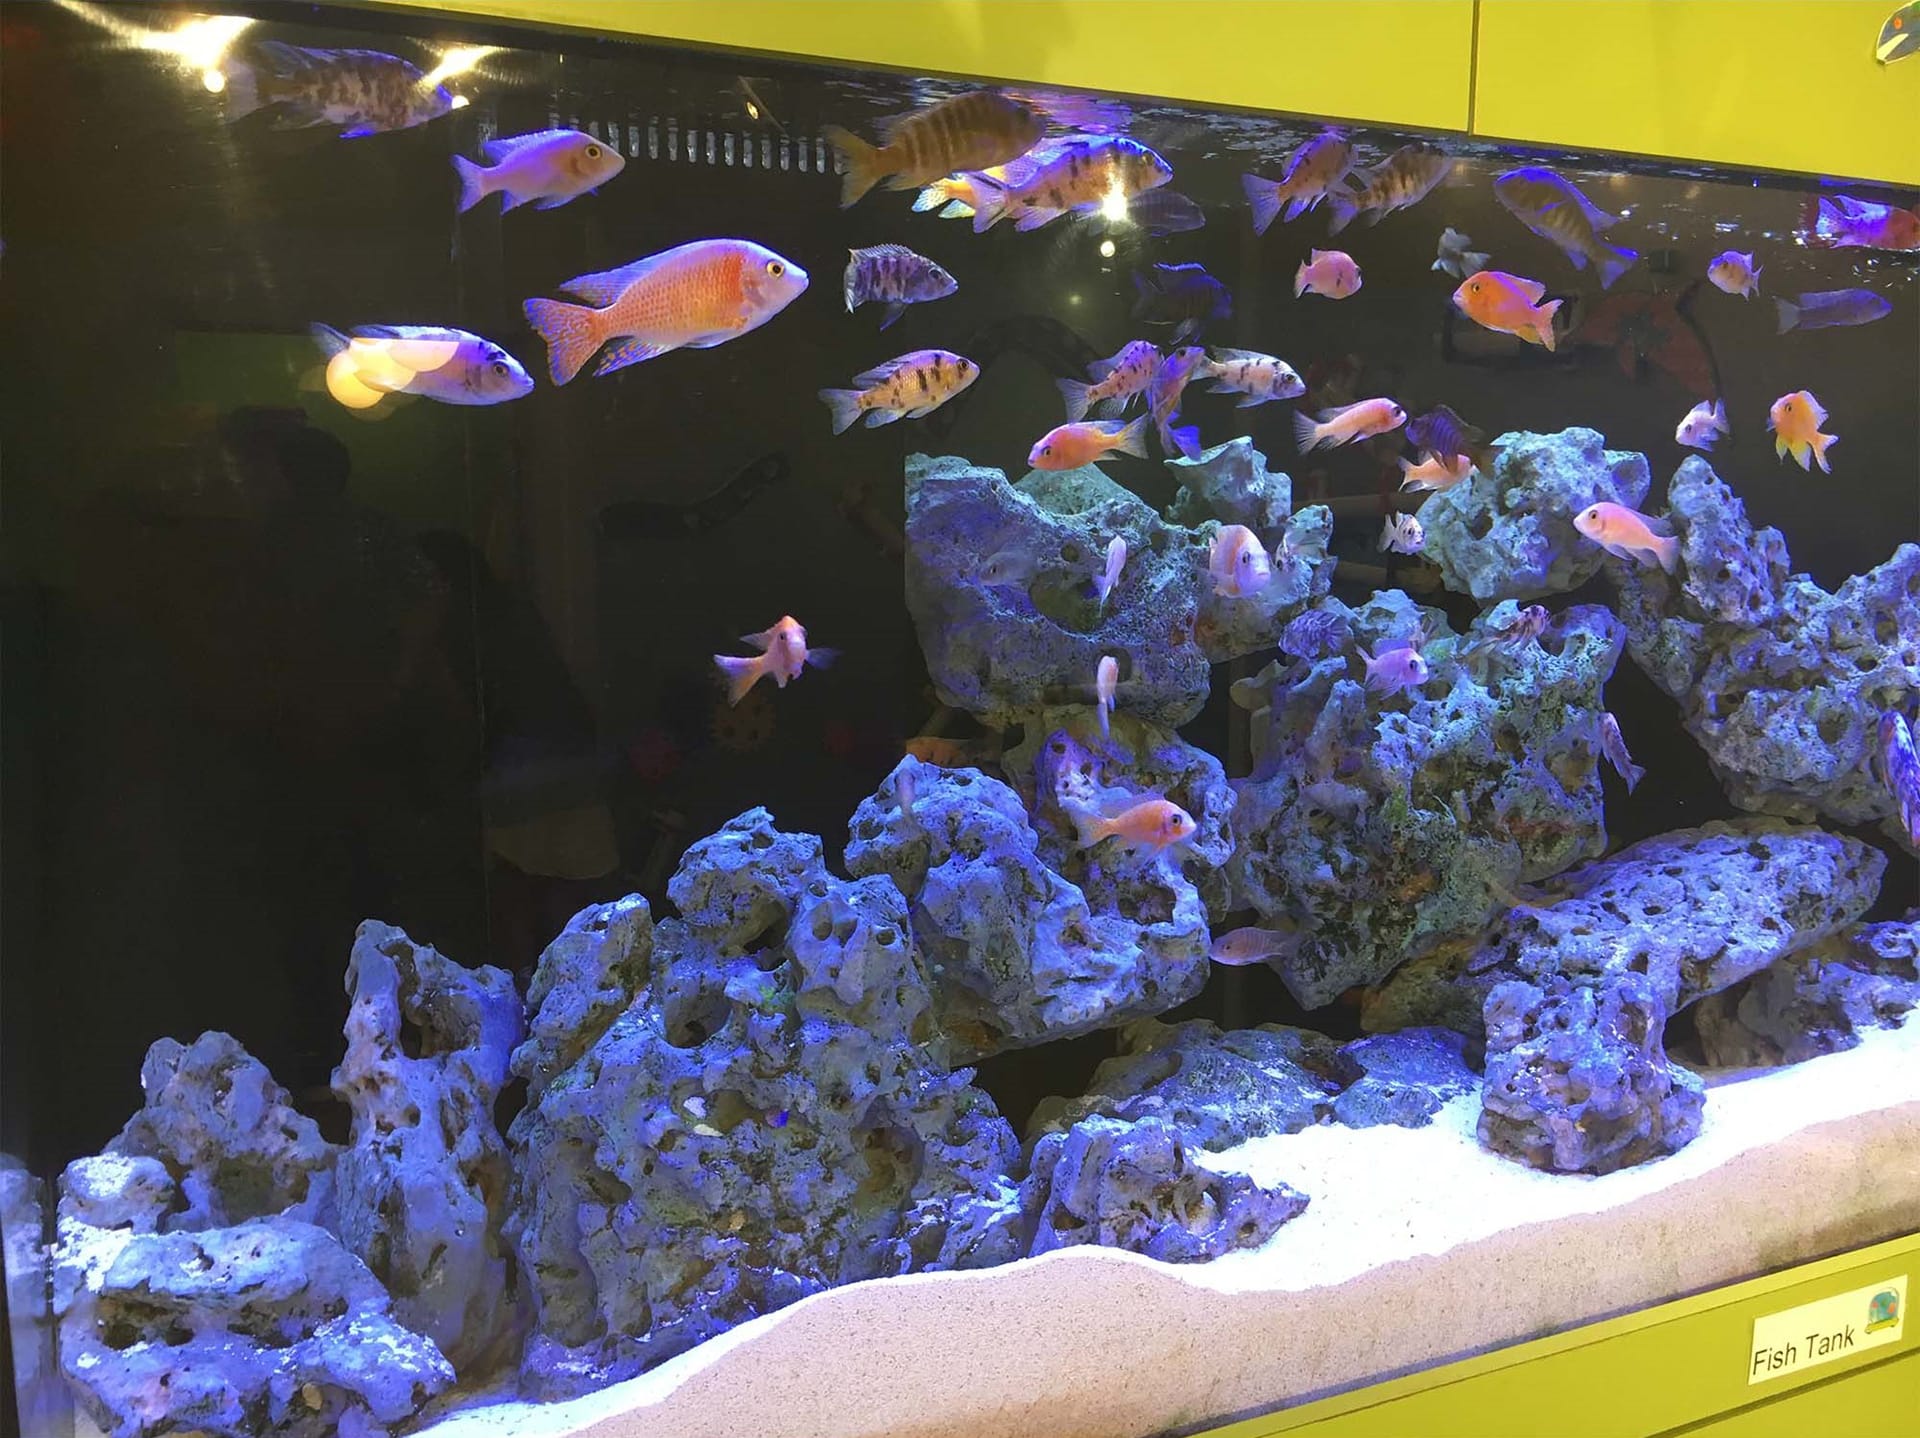 Fish tank with several fish inside.